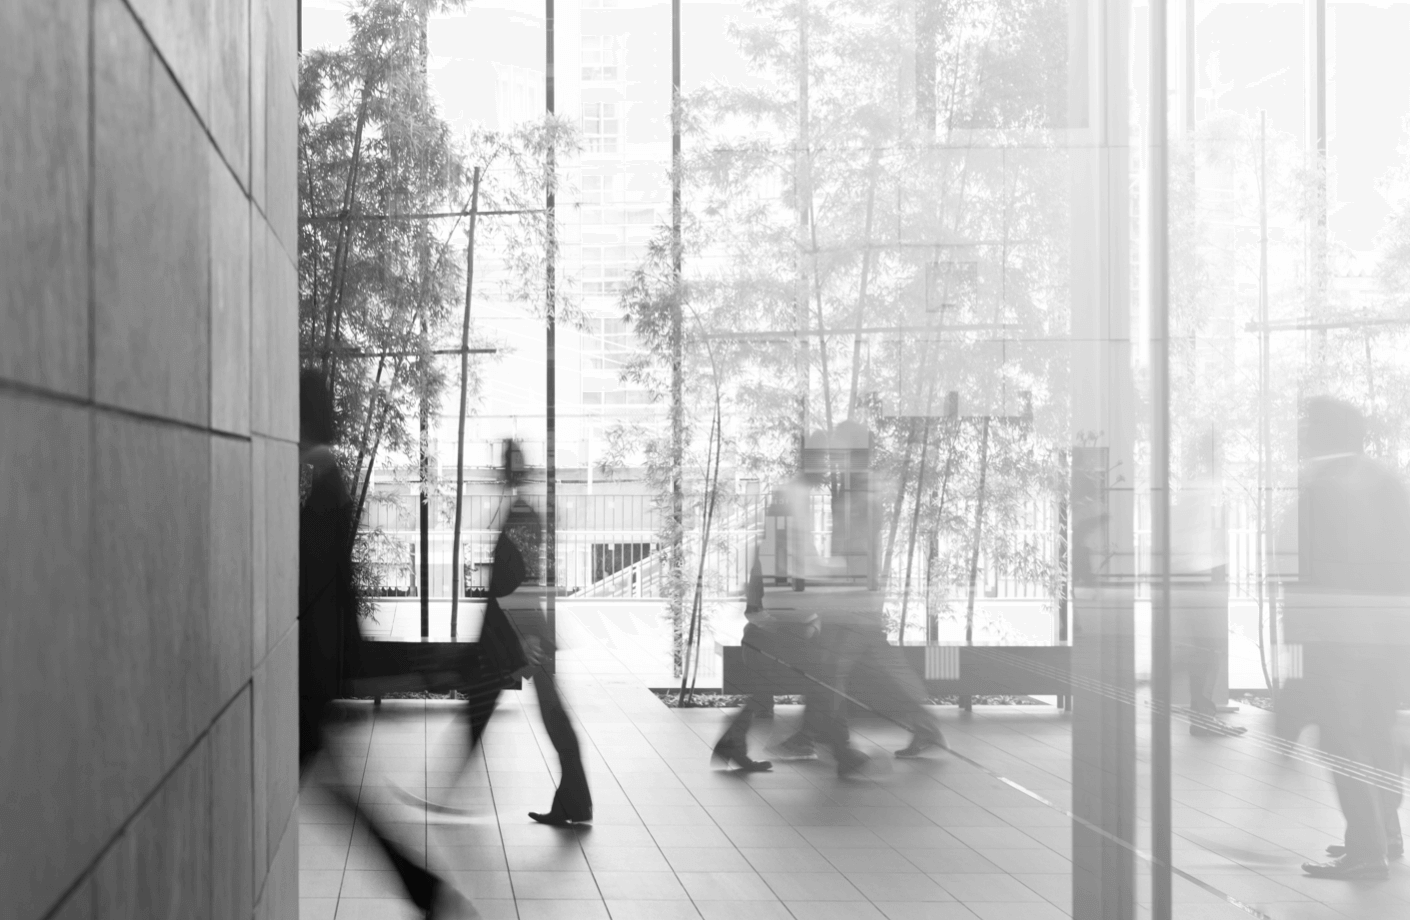 A wide view into the foyer of an office building where blurs of people walk through